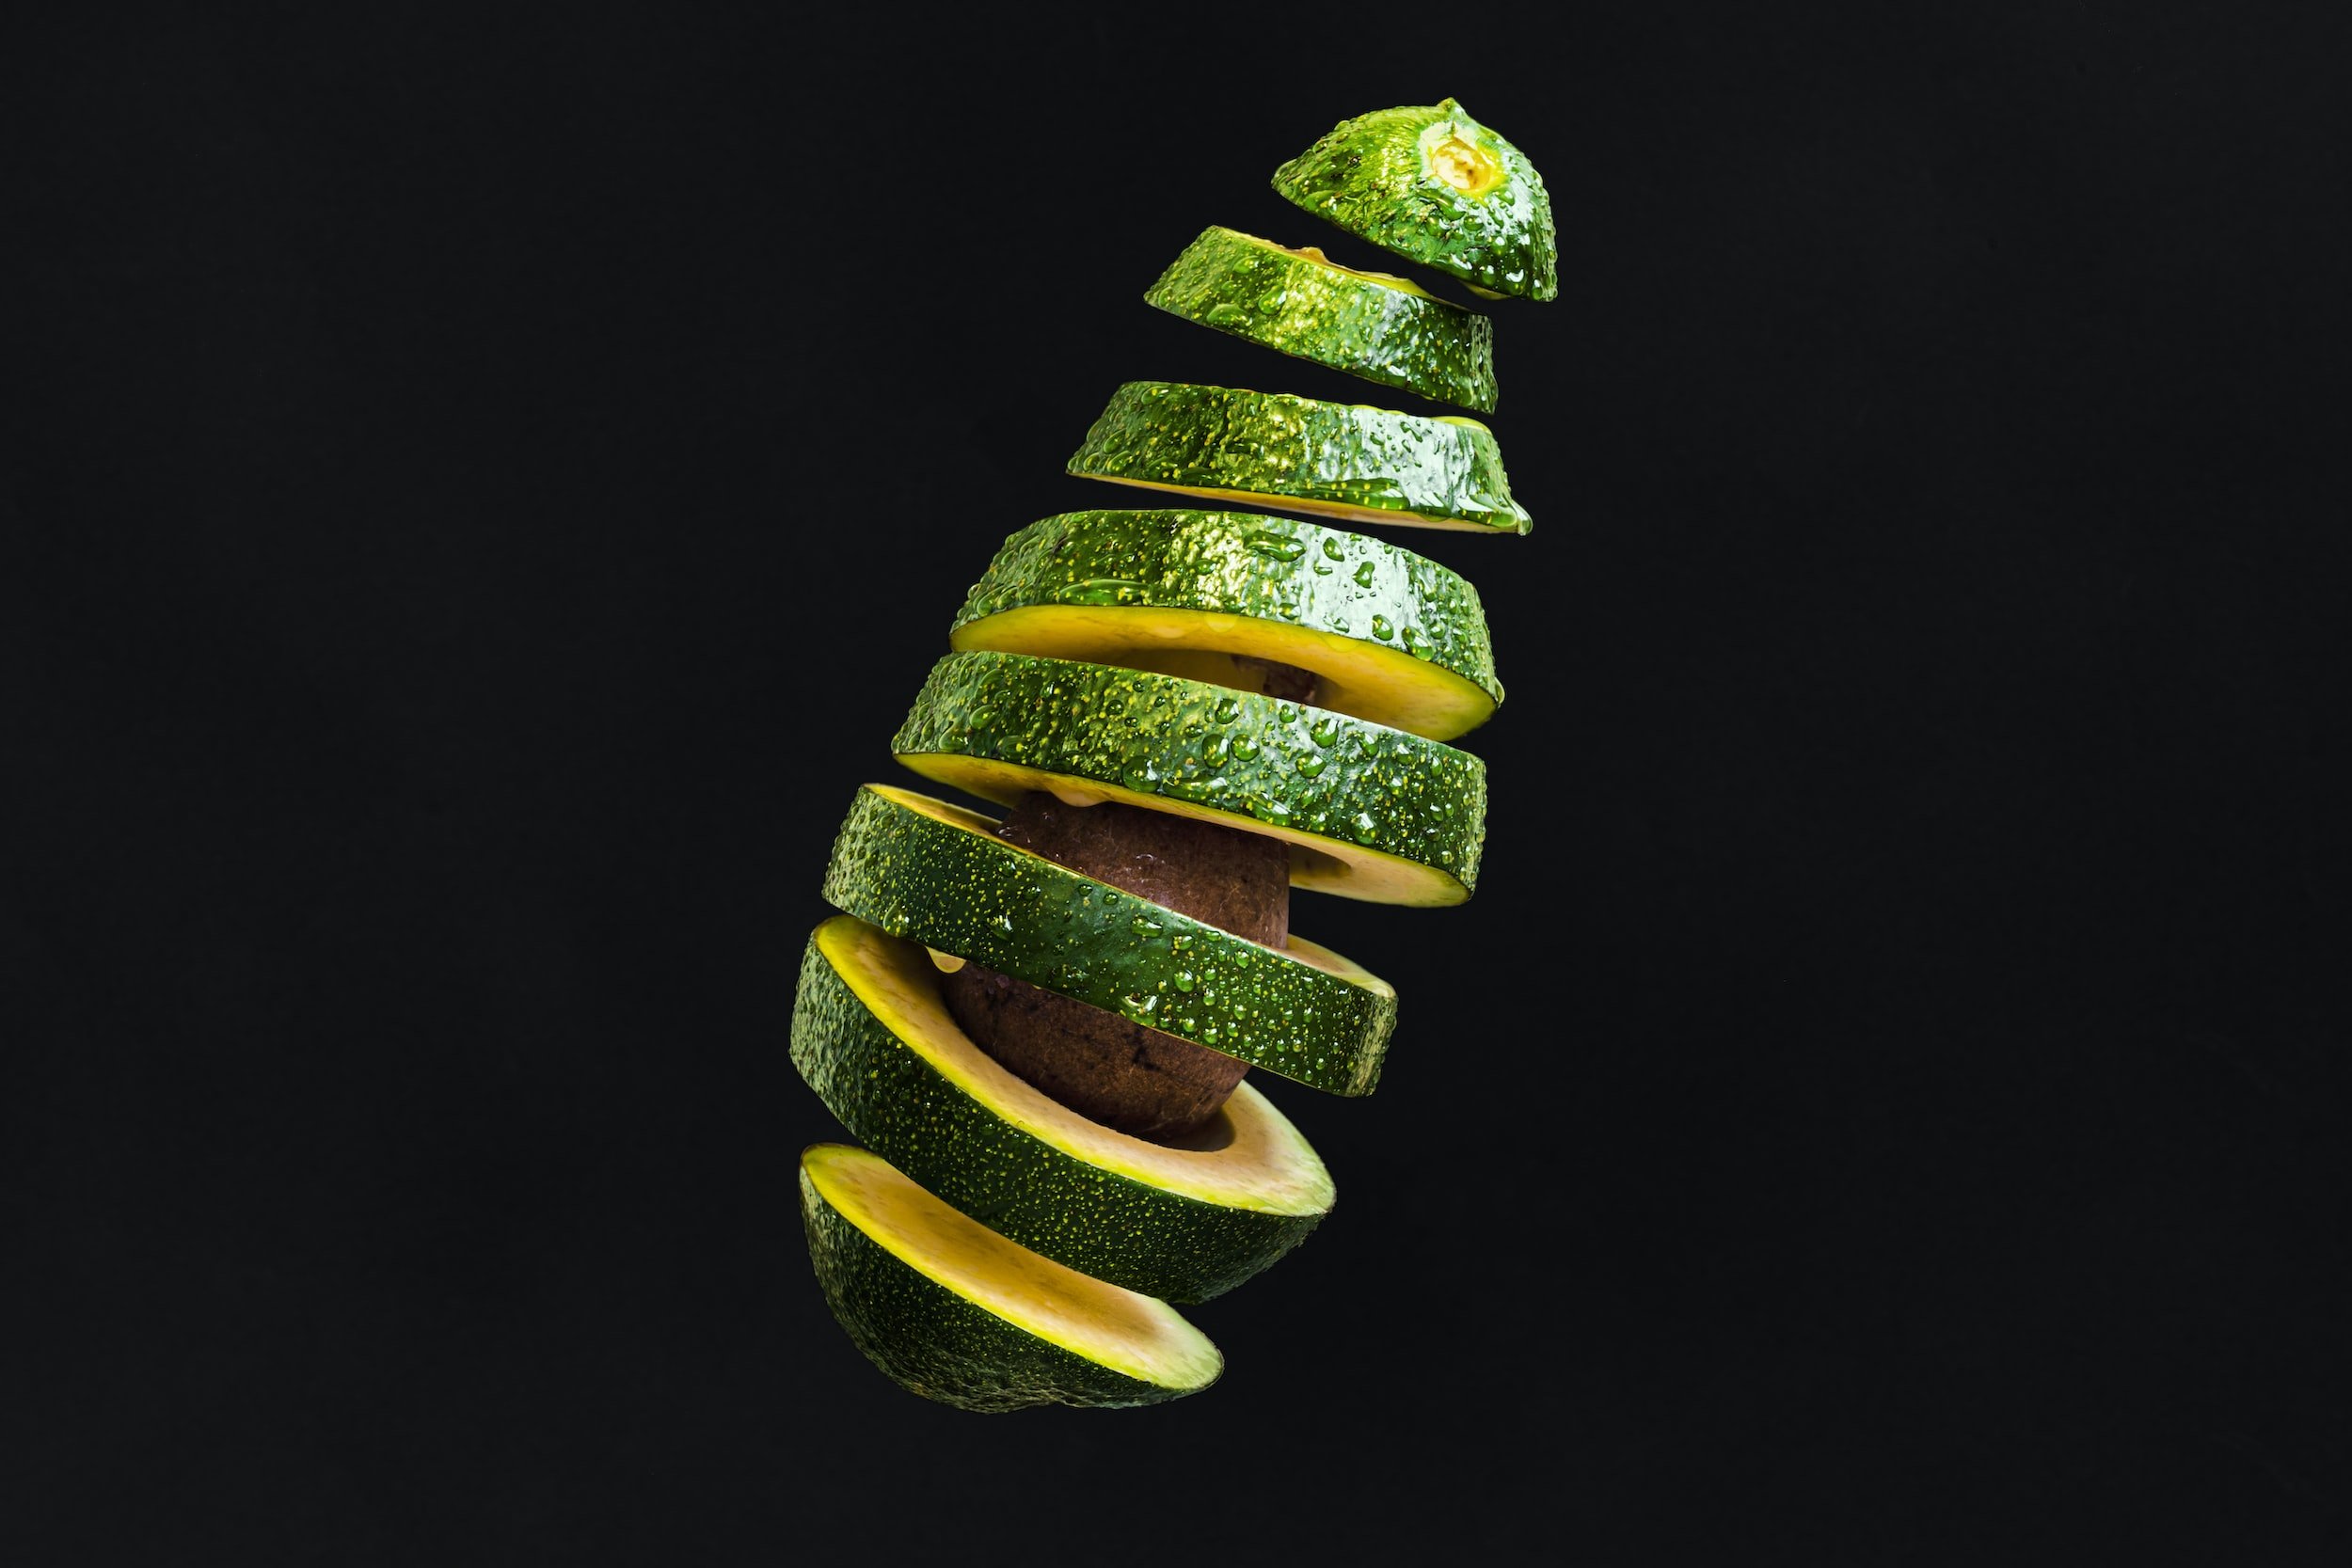 5 Tips on How to Safely Cut an Avocado